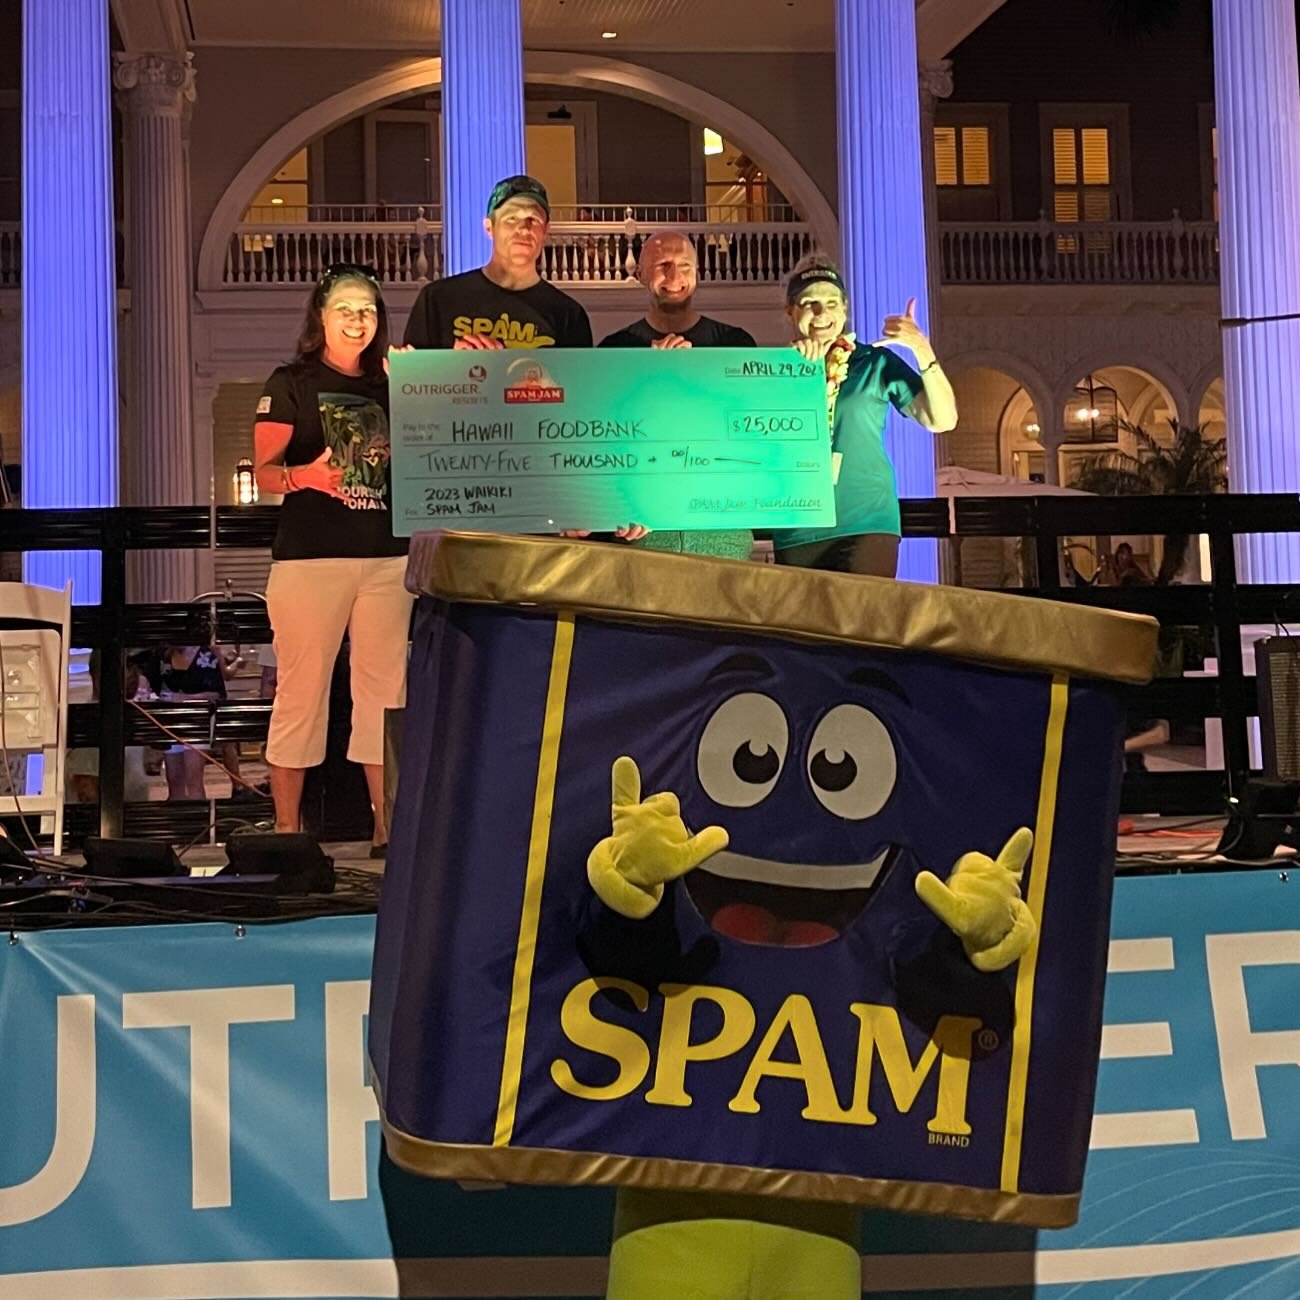 The Waikiki SPAM JAM supports three local non profits in Hawaii. The Hawaii Foodbank, Waikiki Community Center and the Visitor Aloha Society of Hawaii. 
.
Look for Hawaii Foodbank tents where you can donate cash or canned goods and be entered to win 